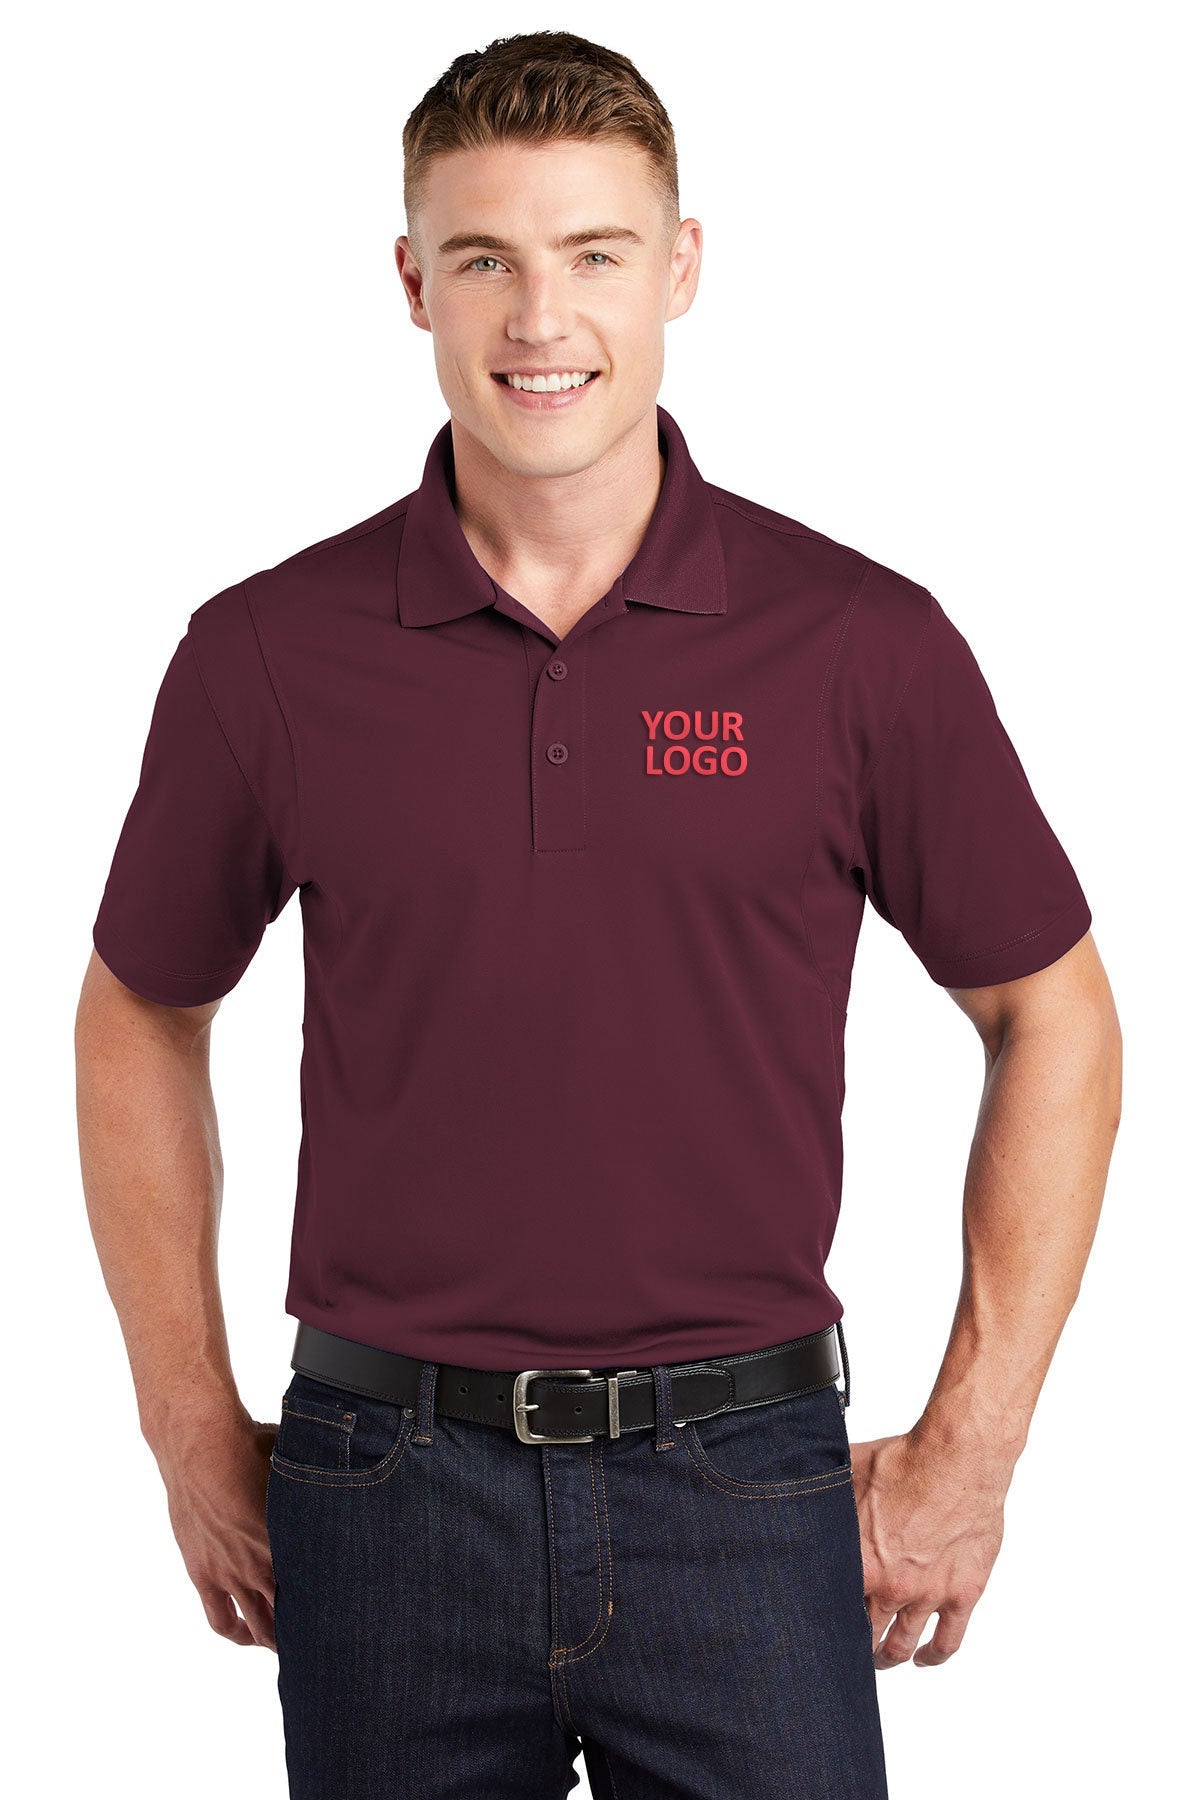 Sport-Tek Maroon TST650 business polo shirts embroidered